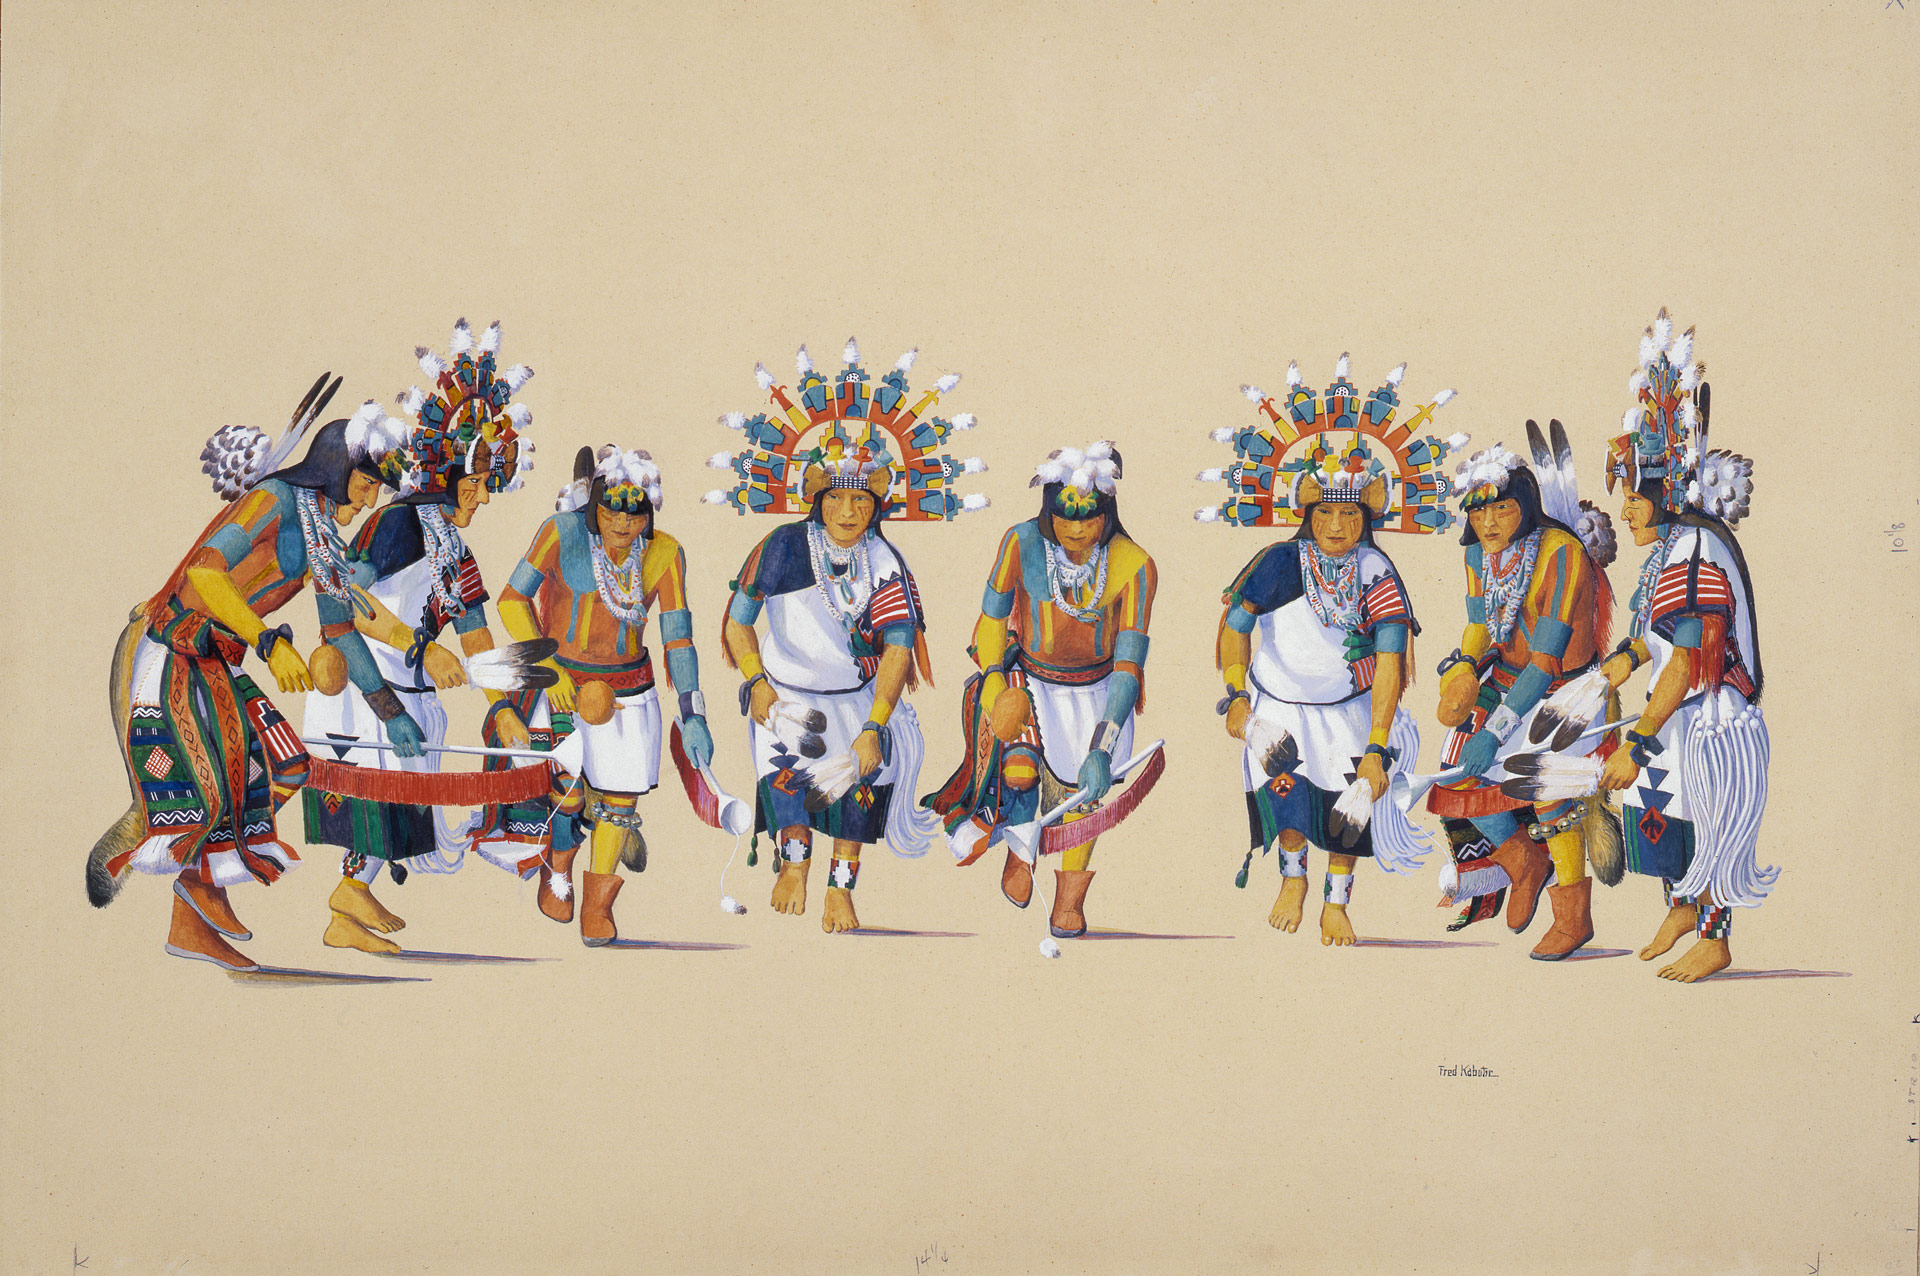 A painting of a group of Native American dancers on a beige background.